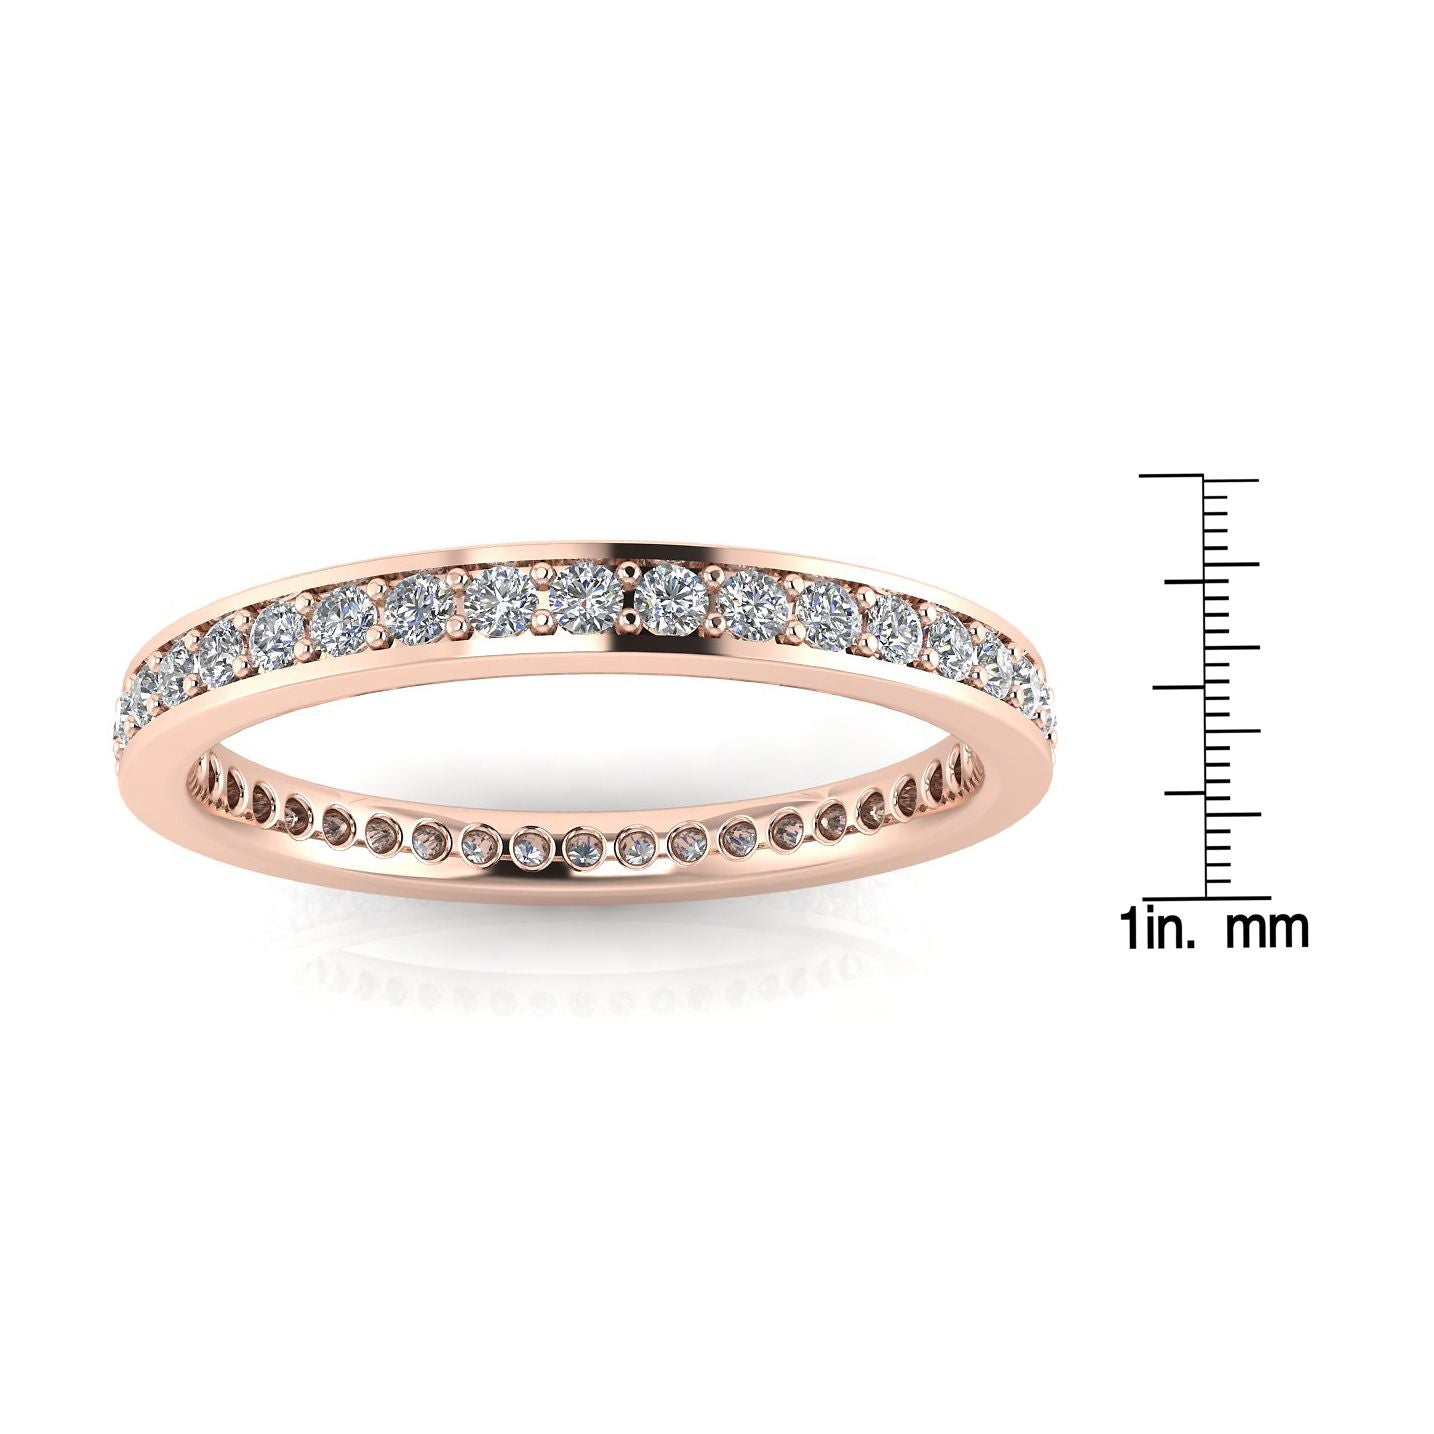 Round Brilliant Cut Diamond Channel Pave Set Eternity Ring In 14k Rose Gold  (0.33ct. Tw.) Ring Size 7